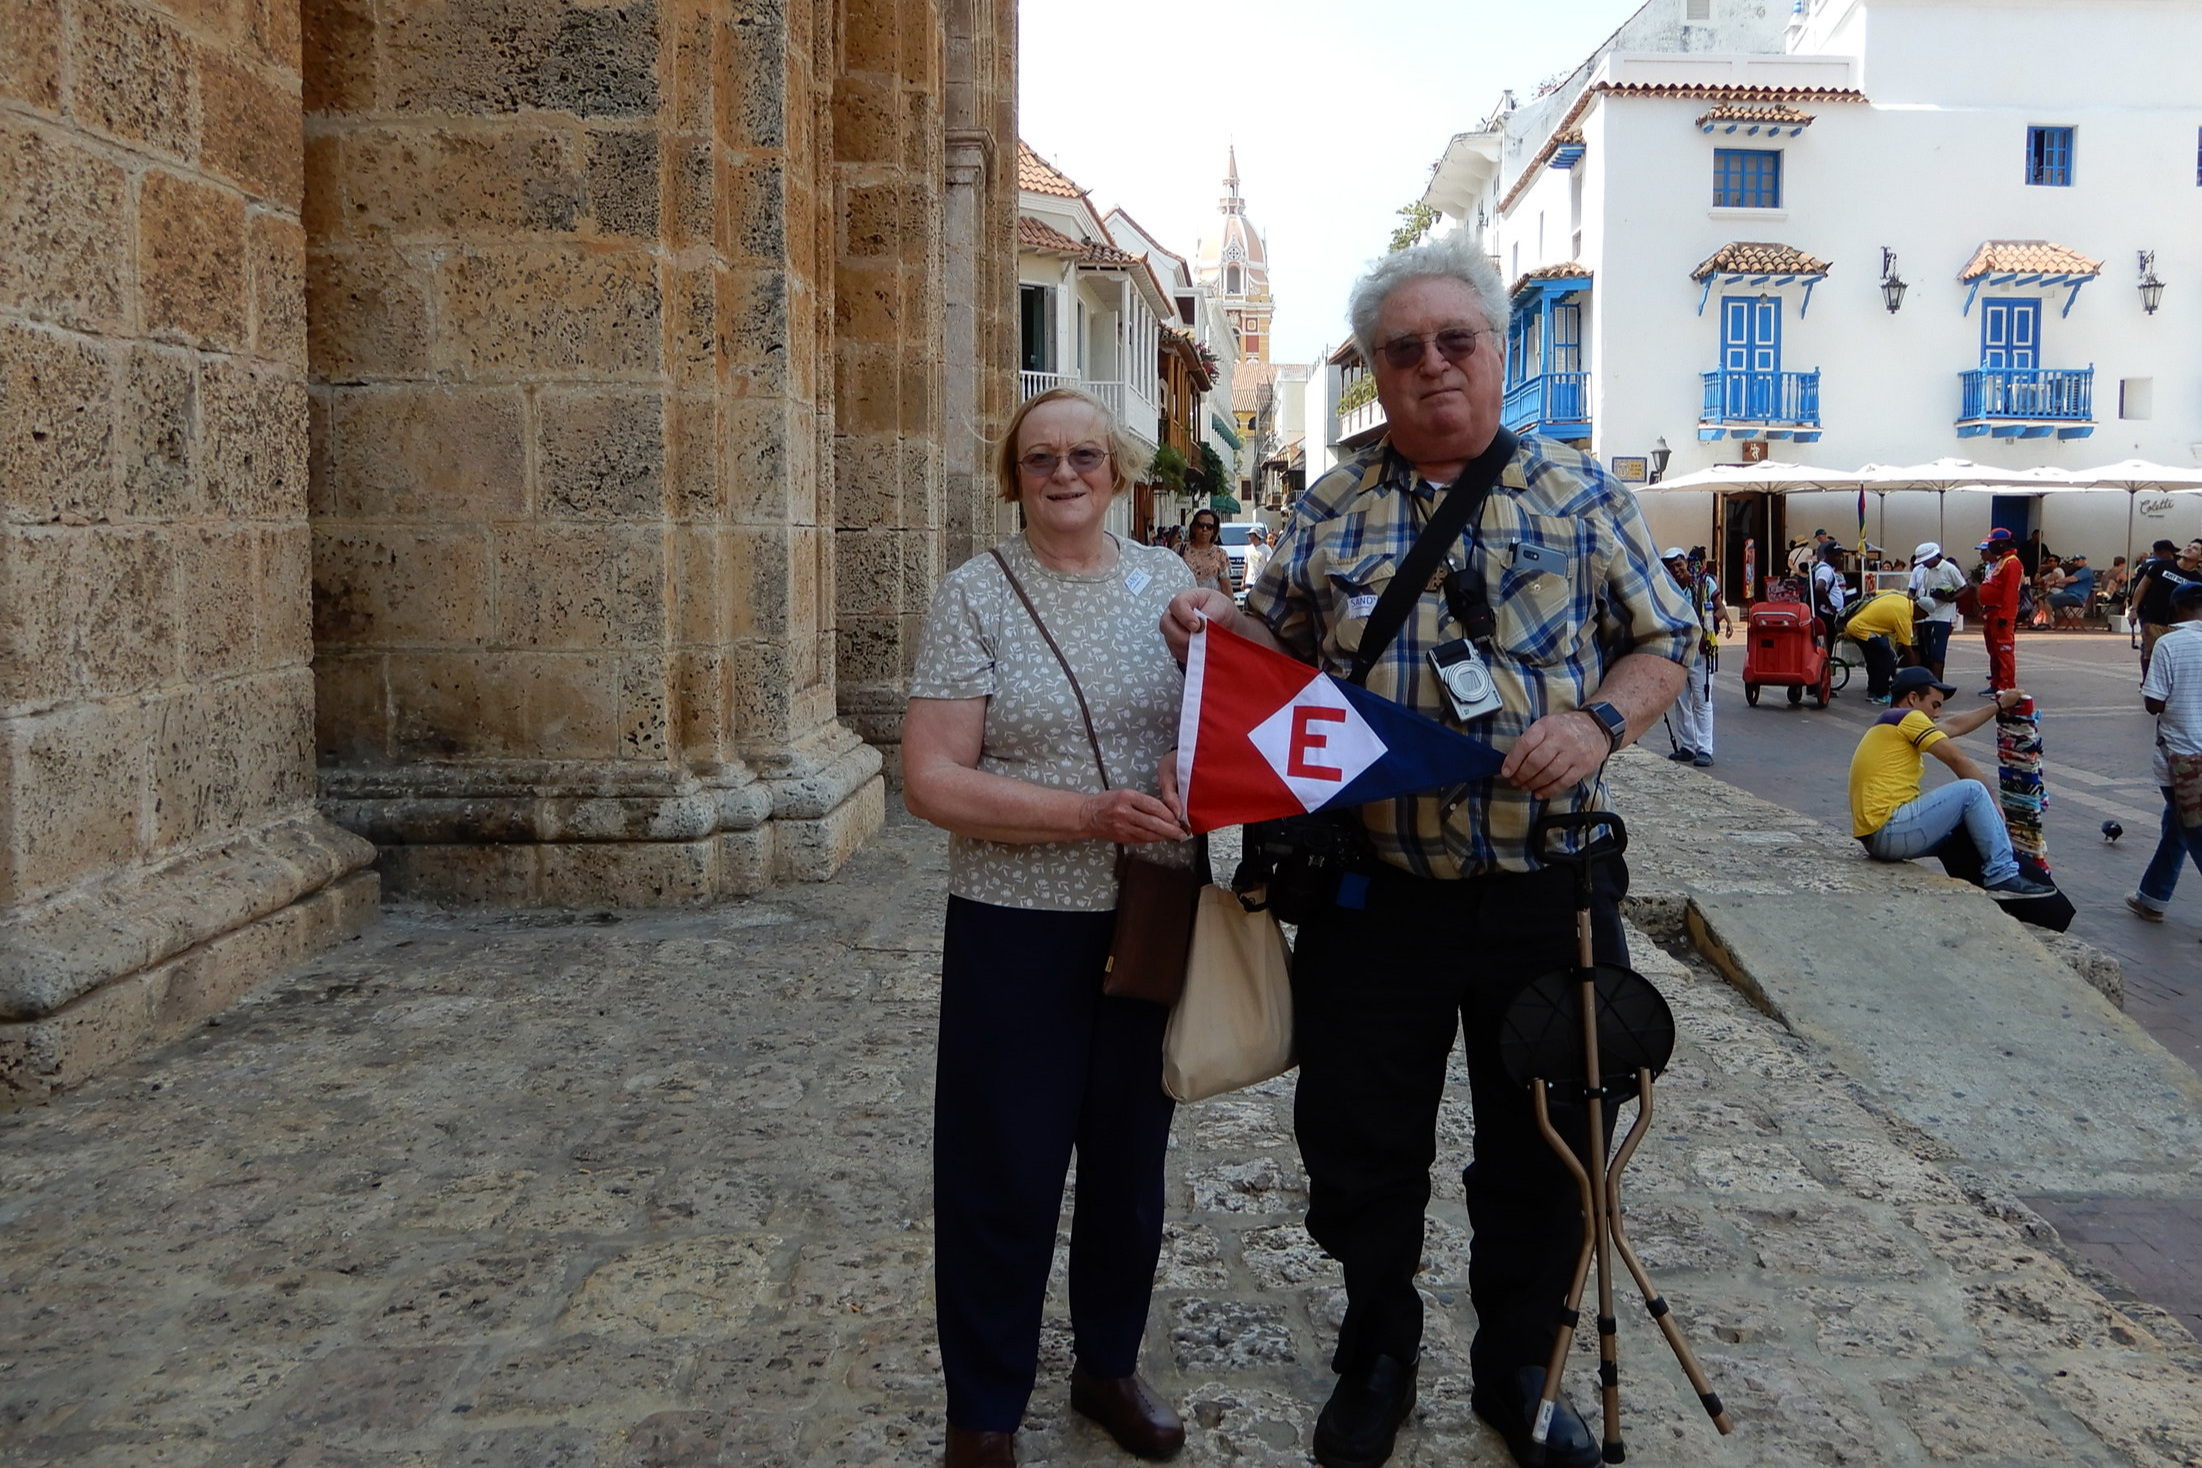  Joan &amp; Keith in the town square of Cartegena, Colombia 